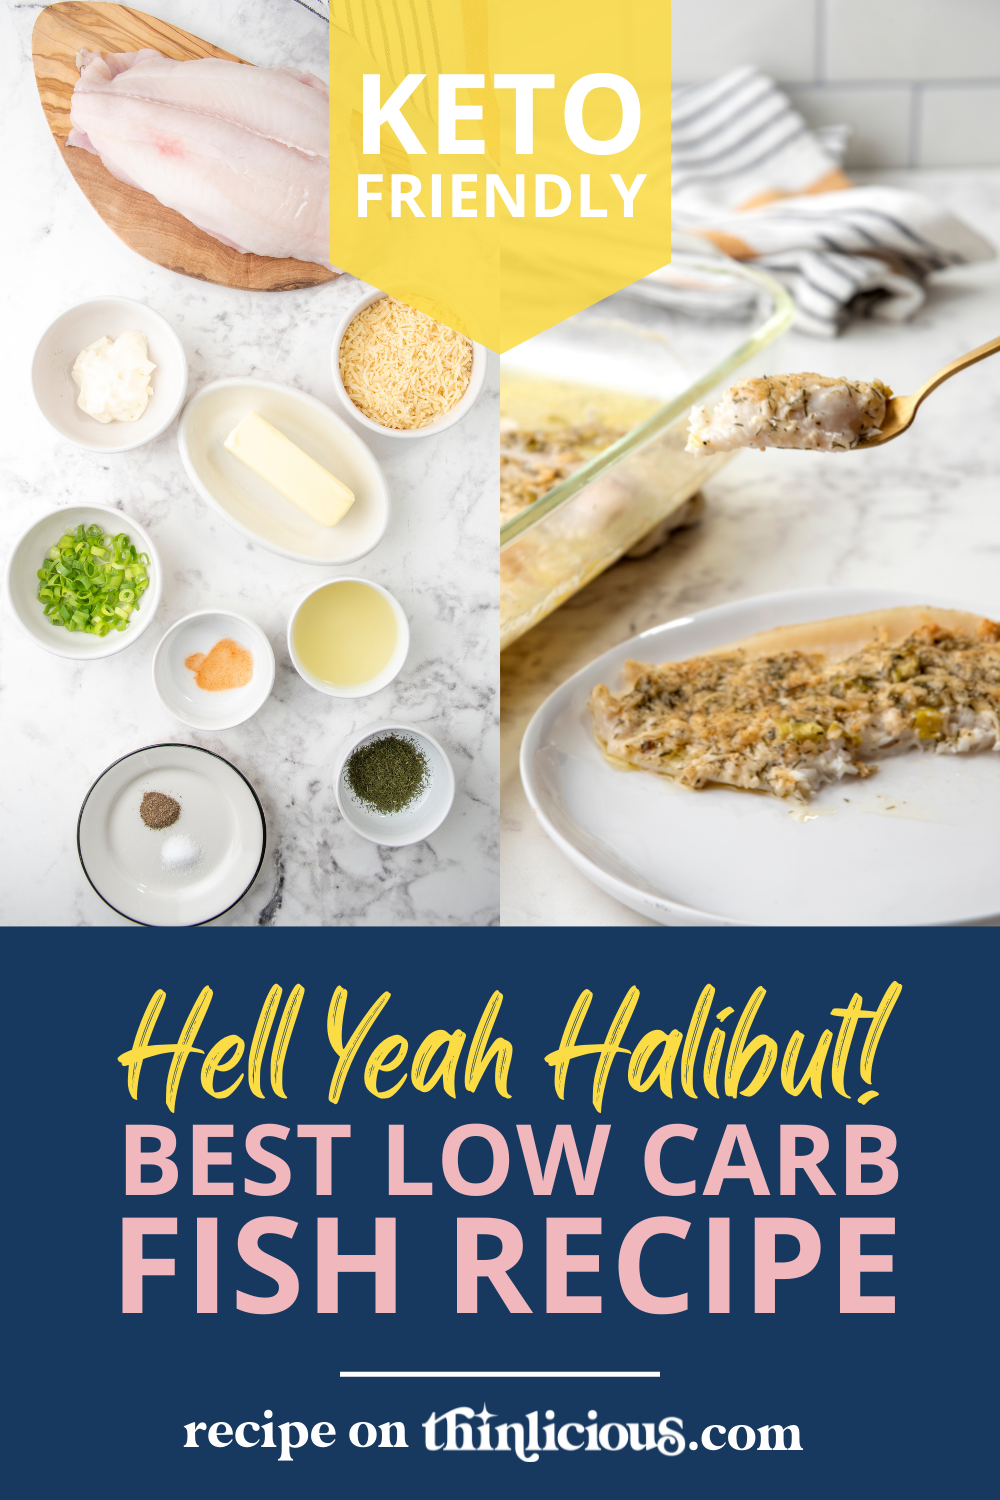 Hell Yeah Halibut! (The Best Low Carb Fish Recipe) - Thinlicious